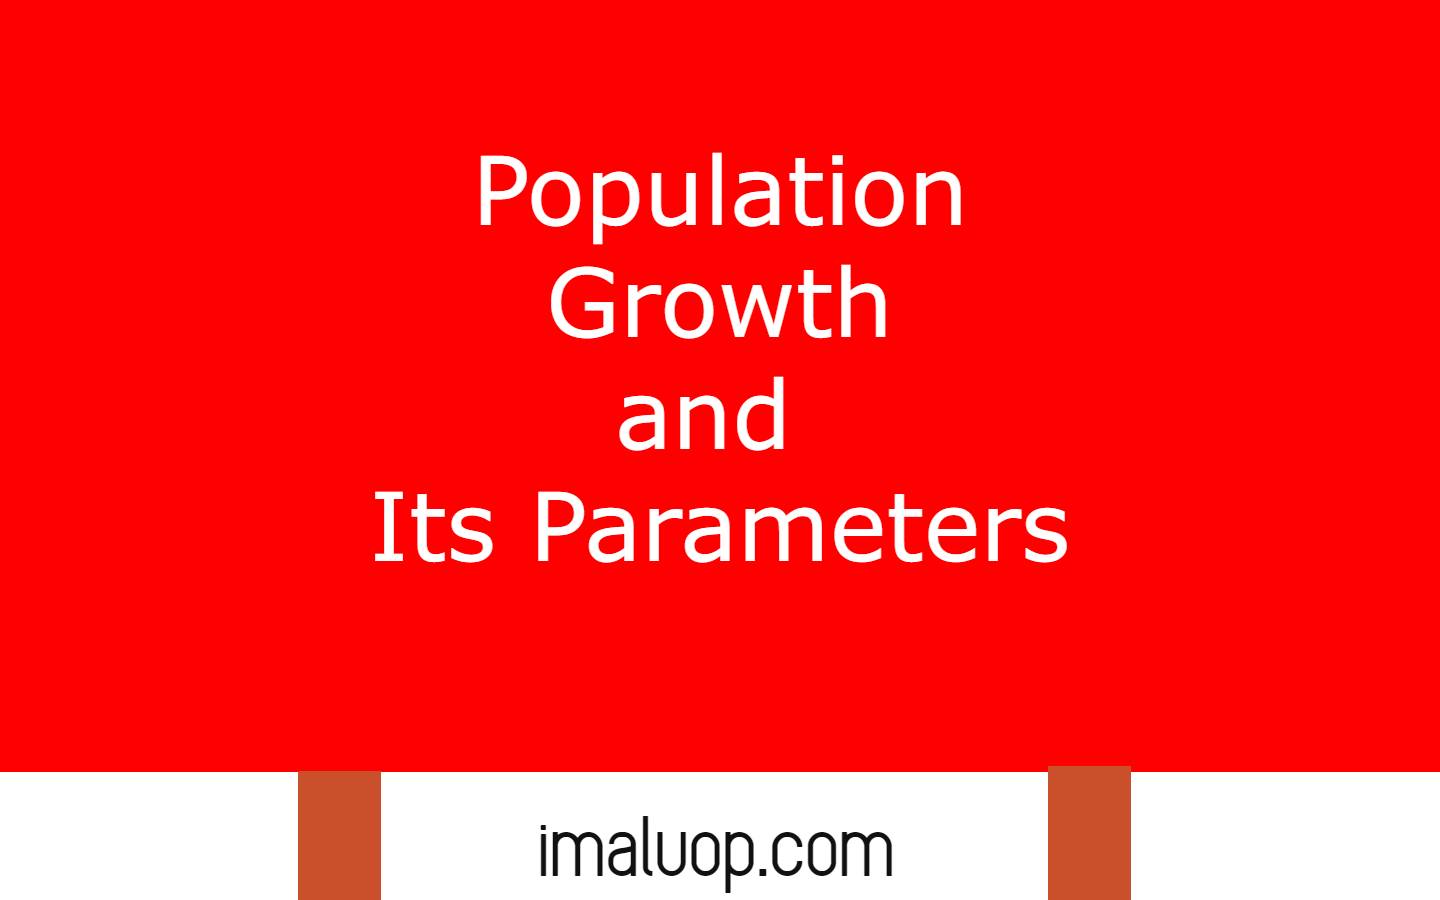 Population Growth and Its Parameters